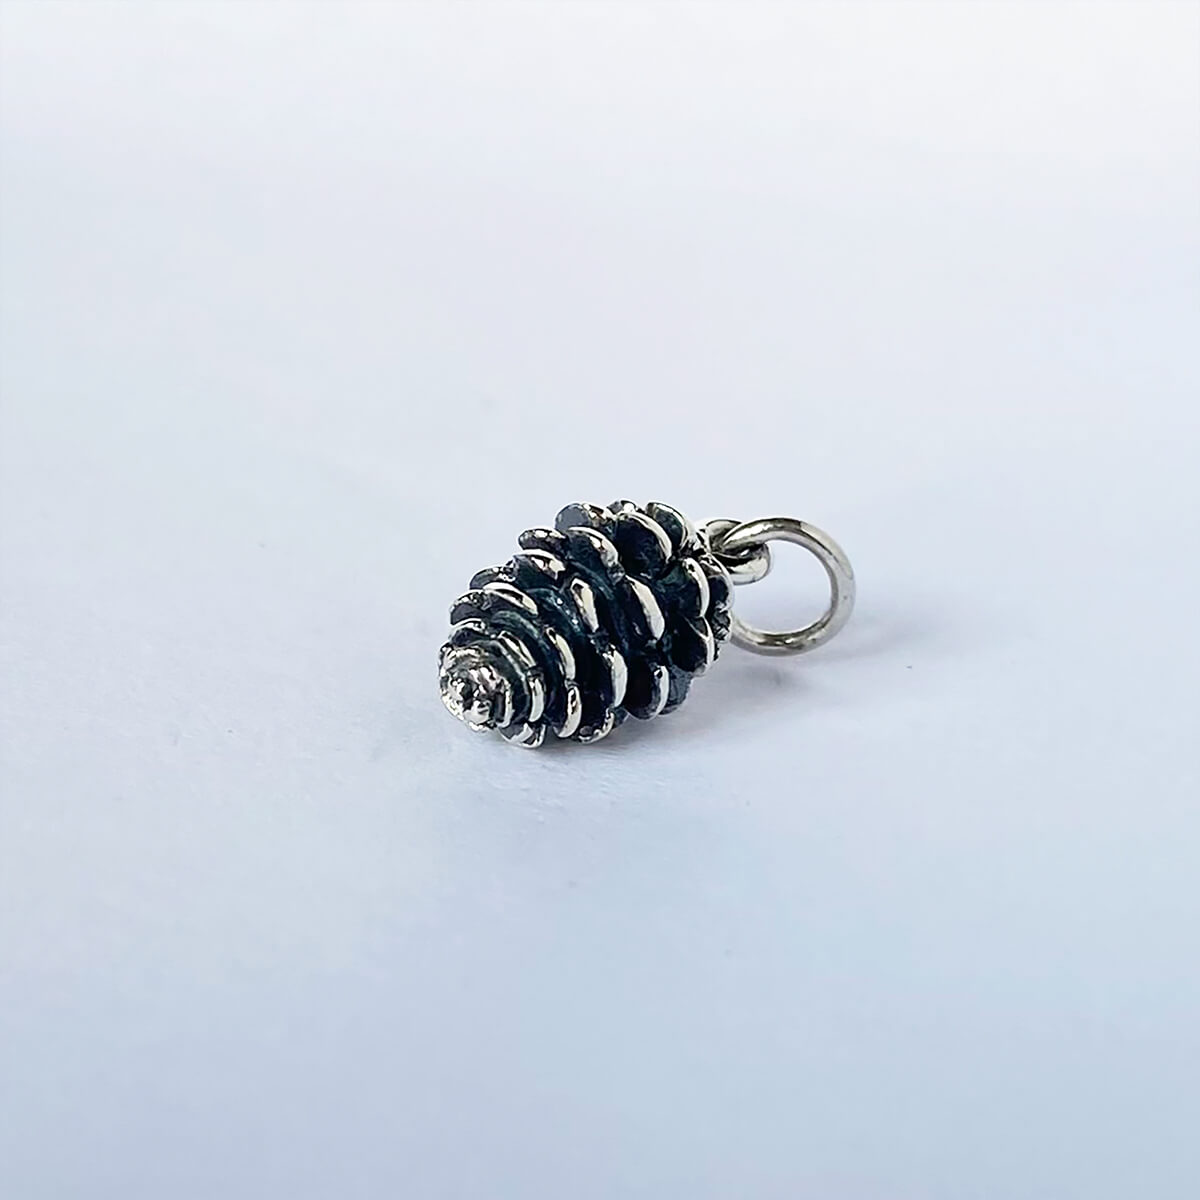 Pinecone charm sterling silver forest pendant